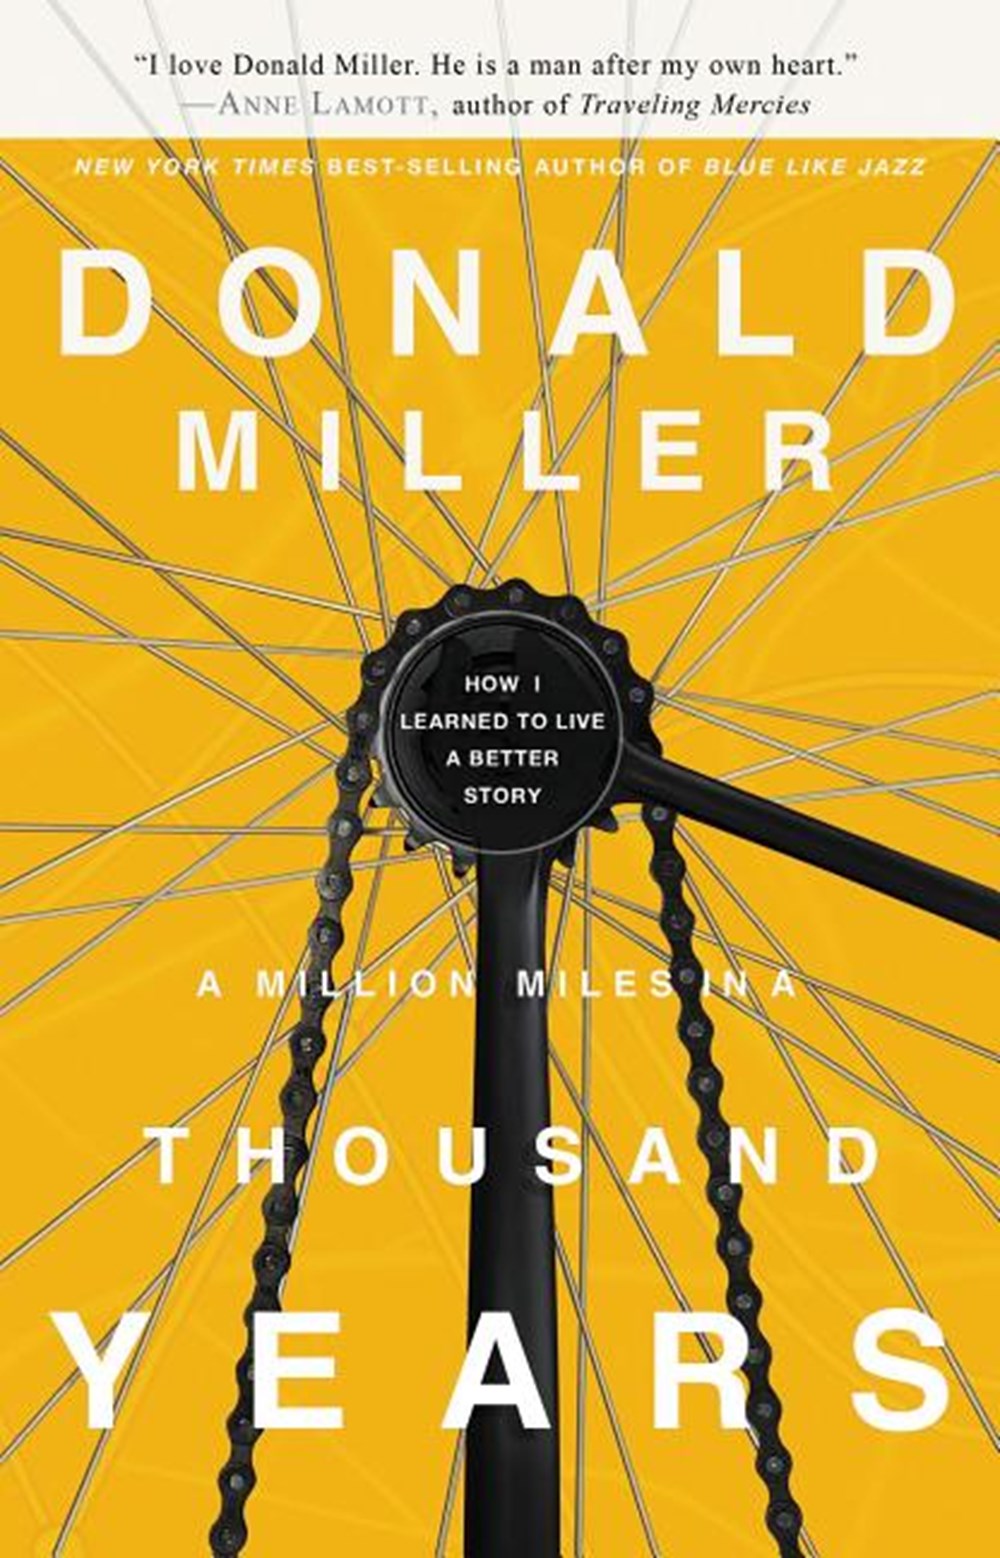 Million Miles in a Thousand Years: How I Learned to Live a Better Story